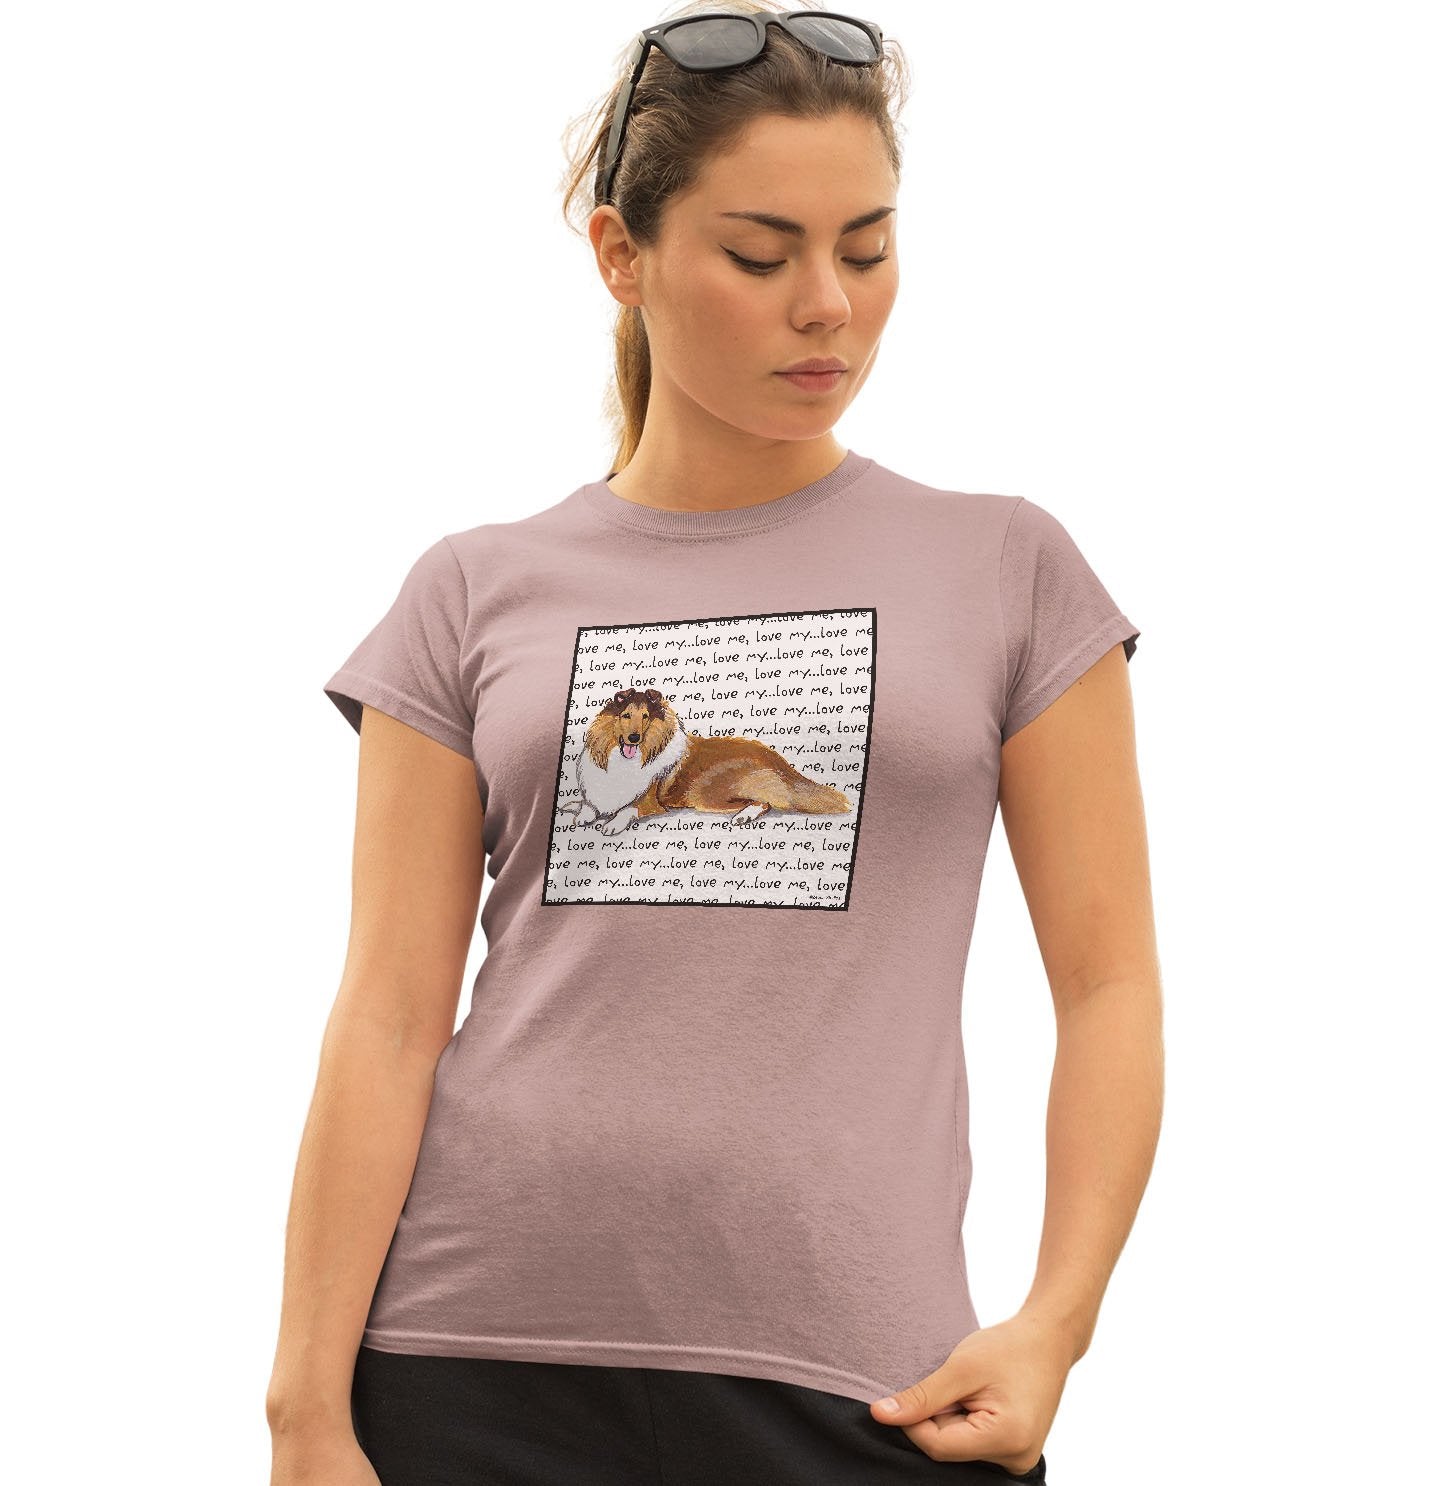 Animal Pride - Collie Love Text - Women's Fitted T-Shirt